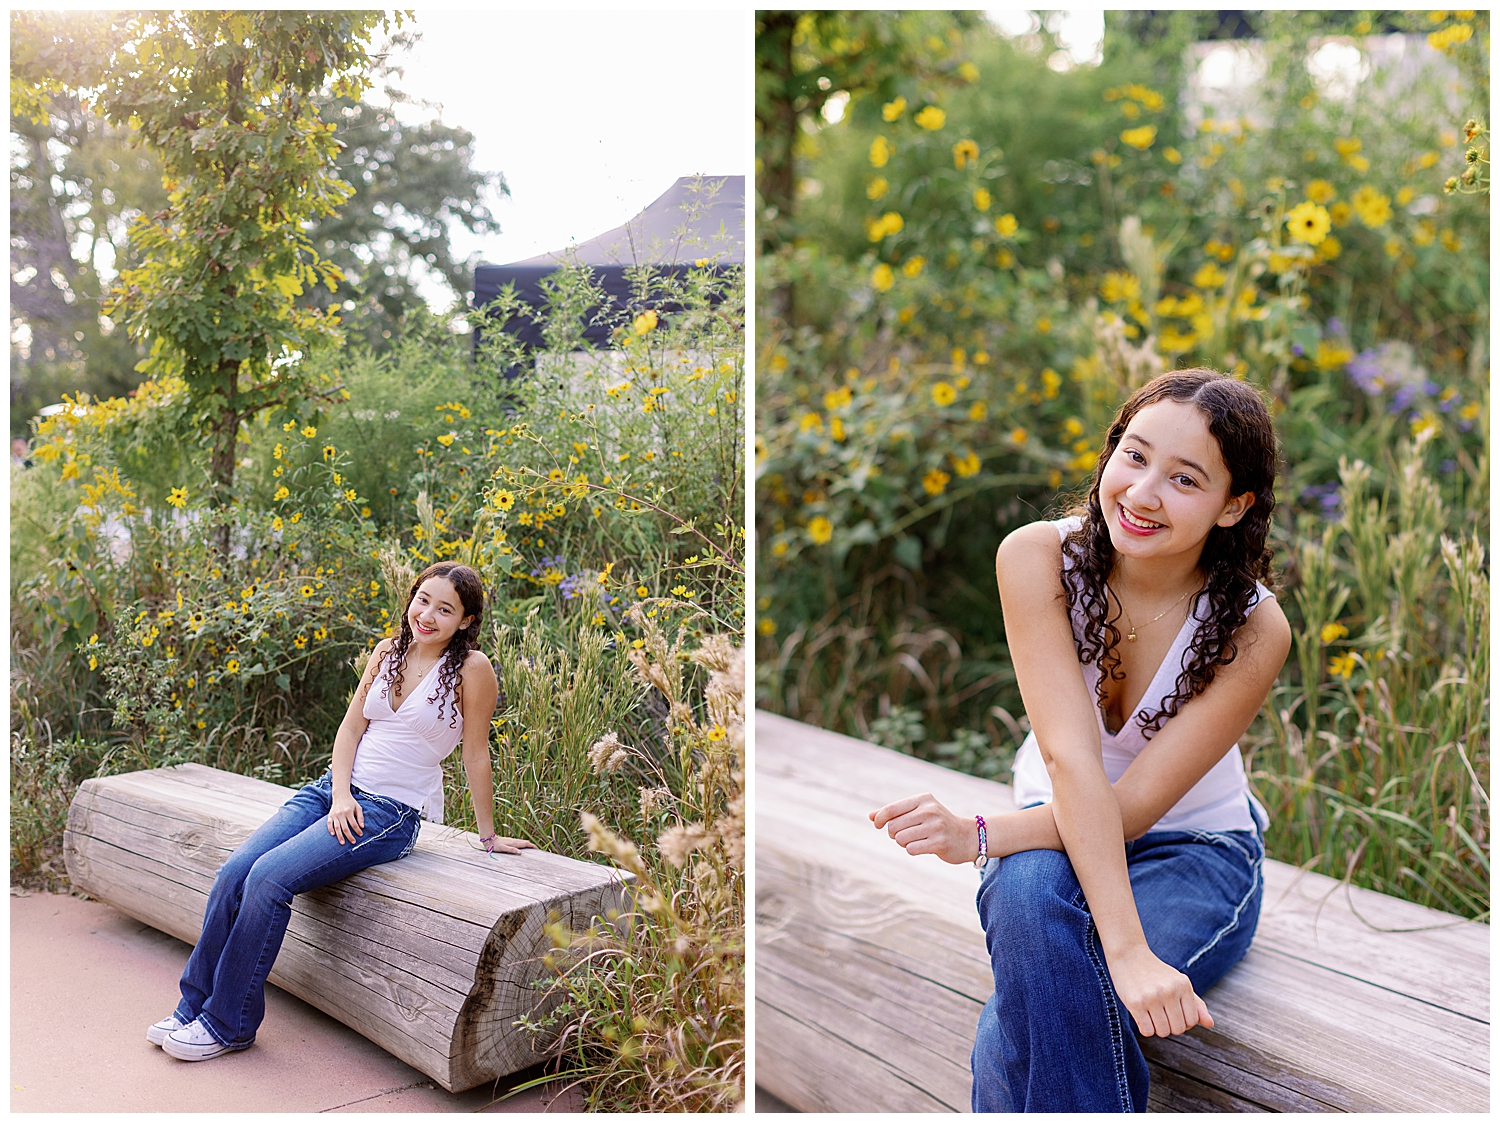 girl in jeans and white shirt sitting on bench Houston Arboretum senior pictures with flowers